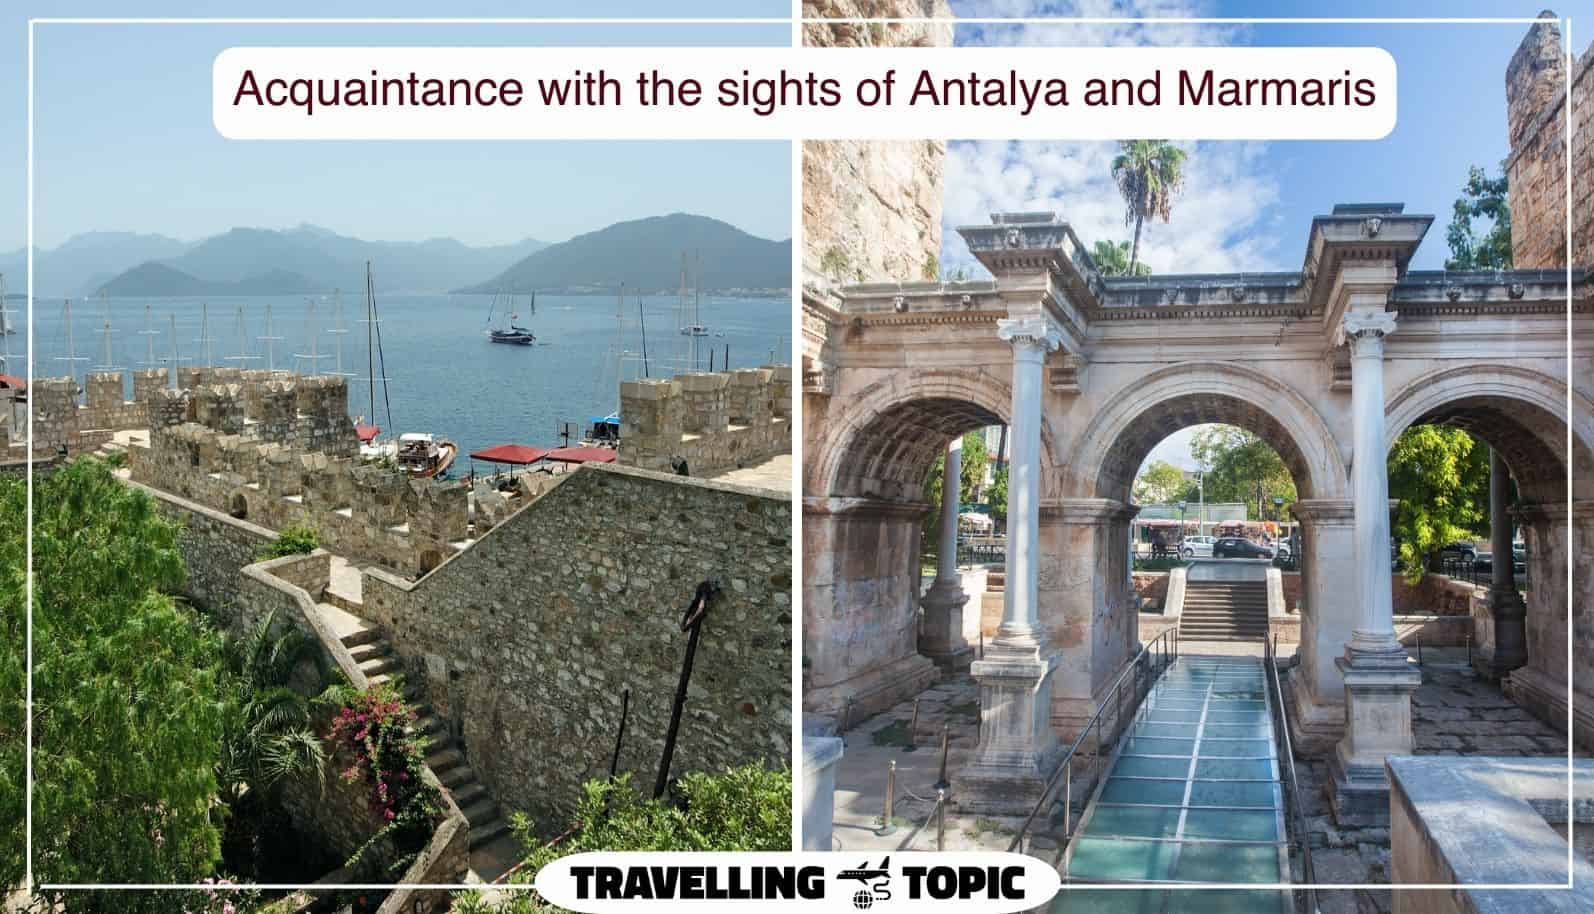 Acquaintance with the sights of Antalya and Marmaris